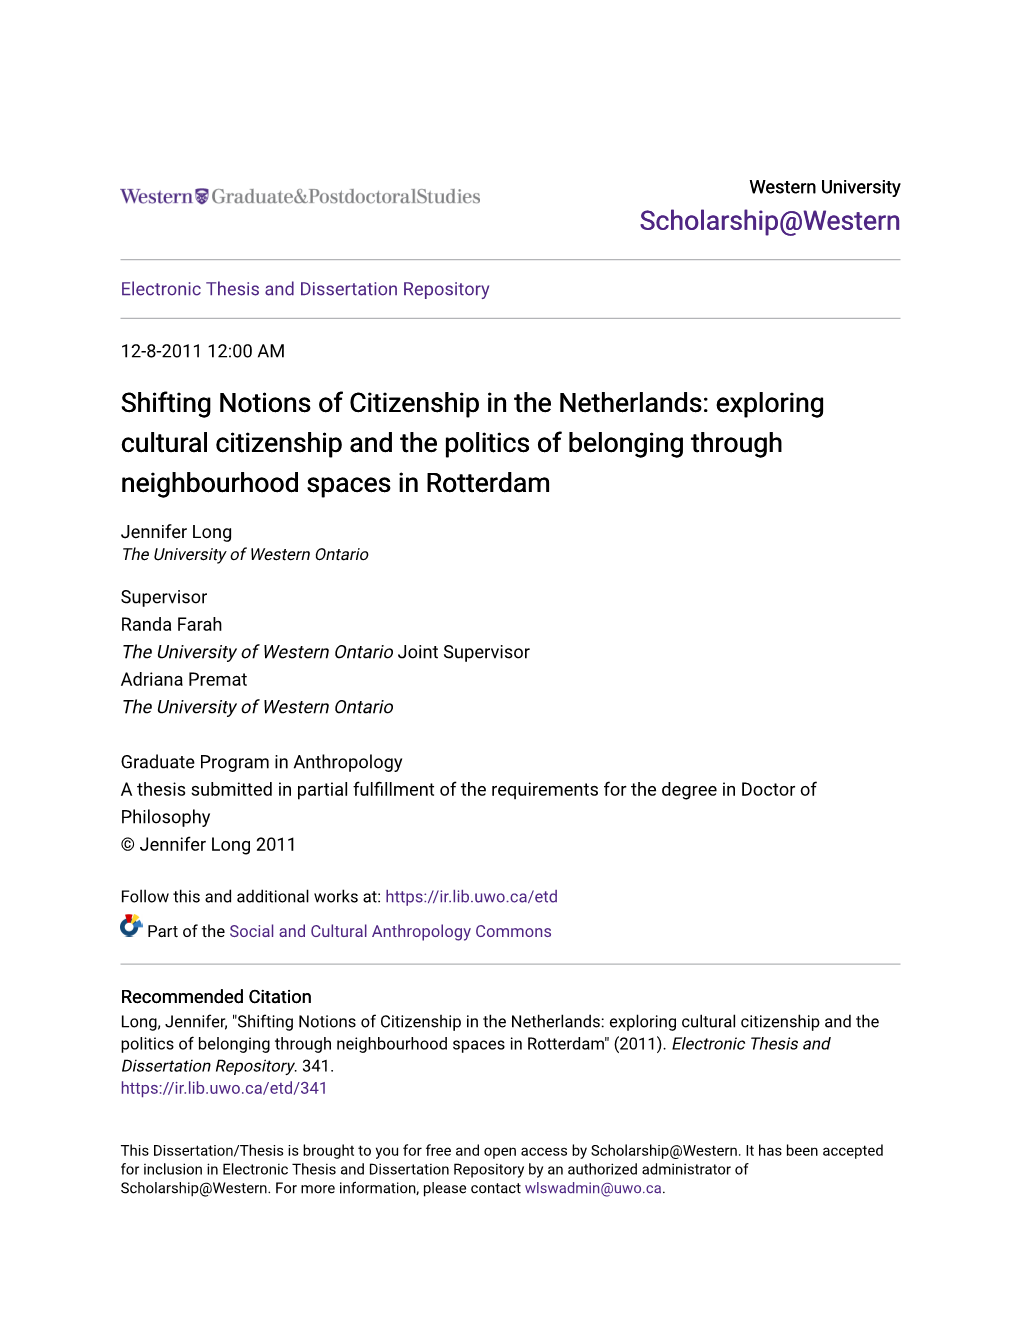 Shifting Notions of Citizenship in the Netherlands: Exploring Cultural Citizenship and the Politics of Belonging Through Neighbourhood Spaces in Rotterdam